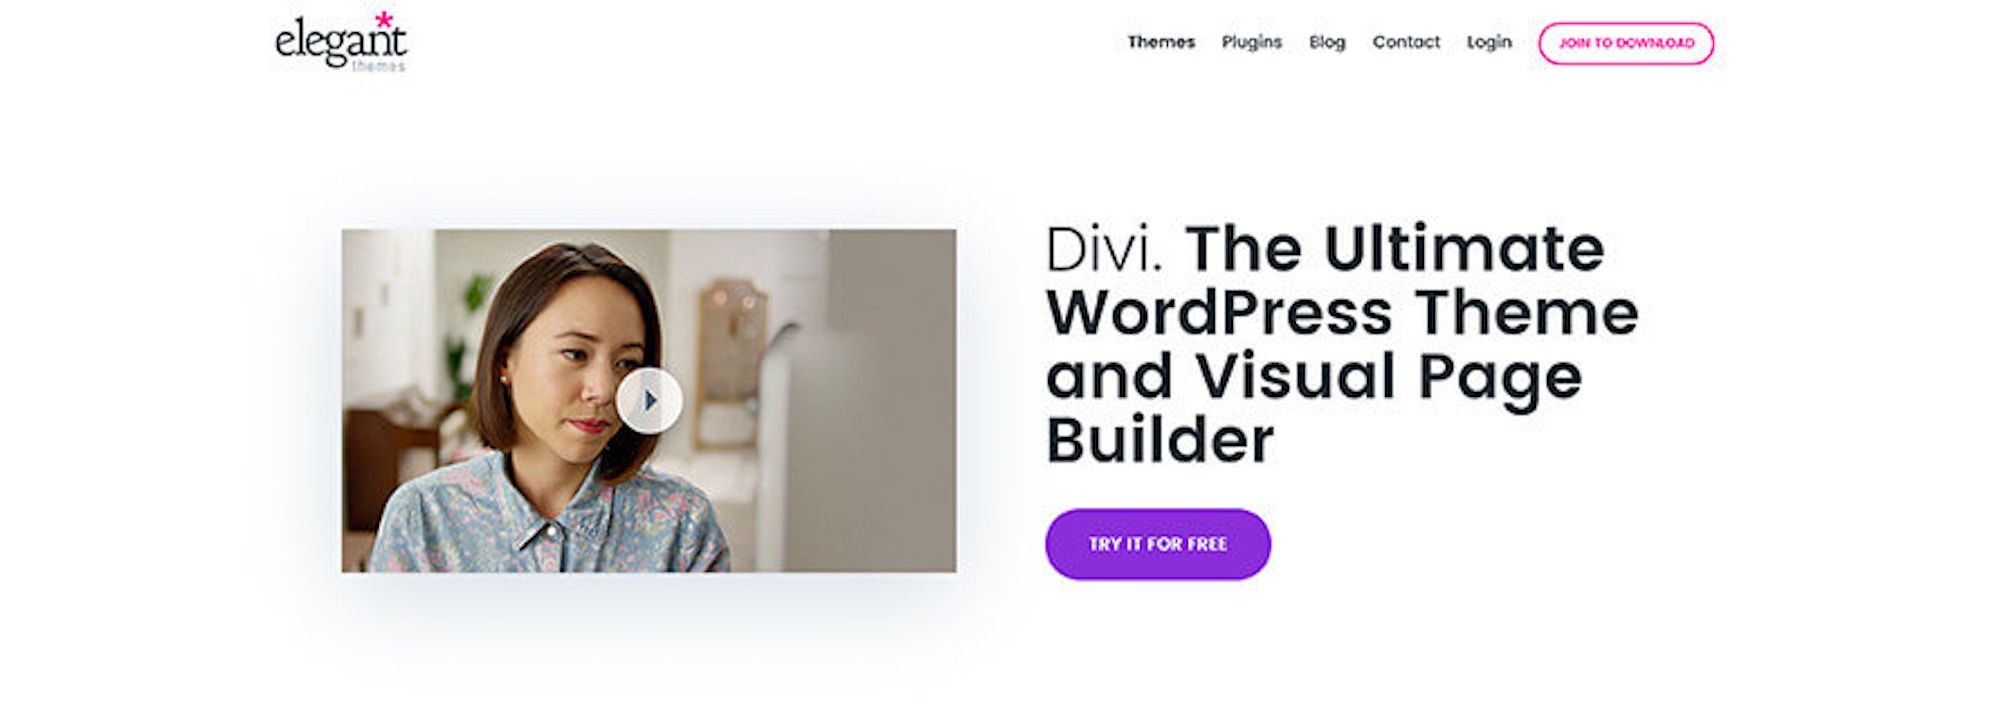 The Divi theme is the flagship of elegant themes.